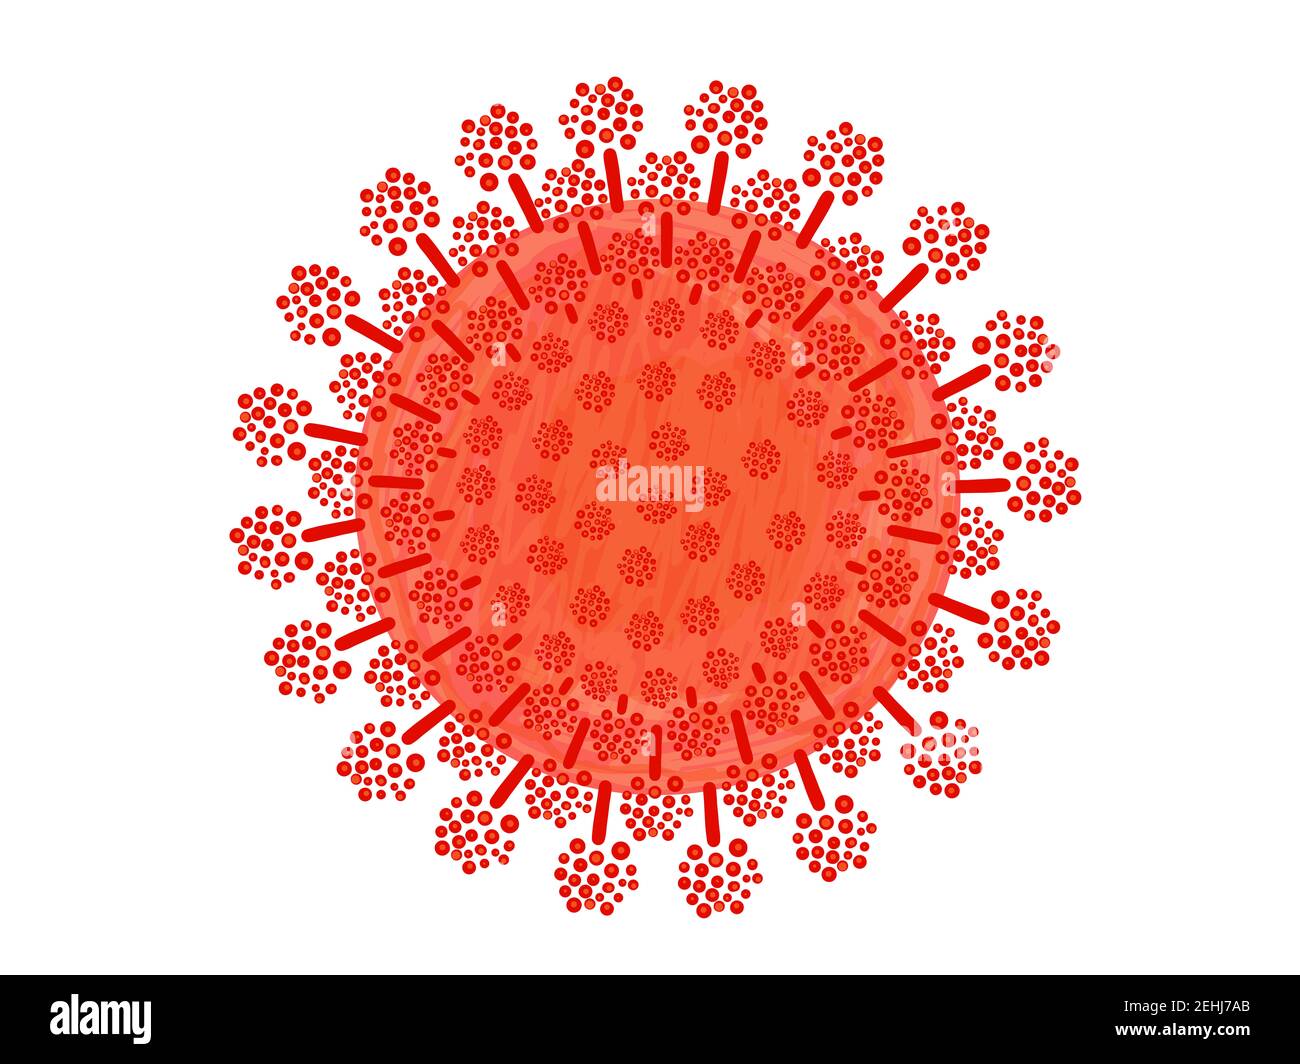 Illustration of one corona virus particle hand drawn on a white background. Stock Photo